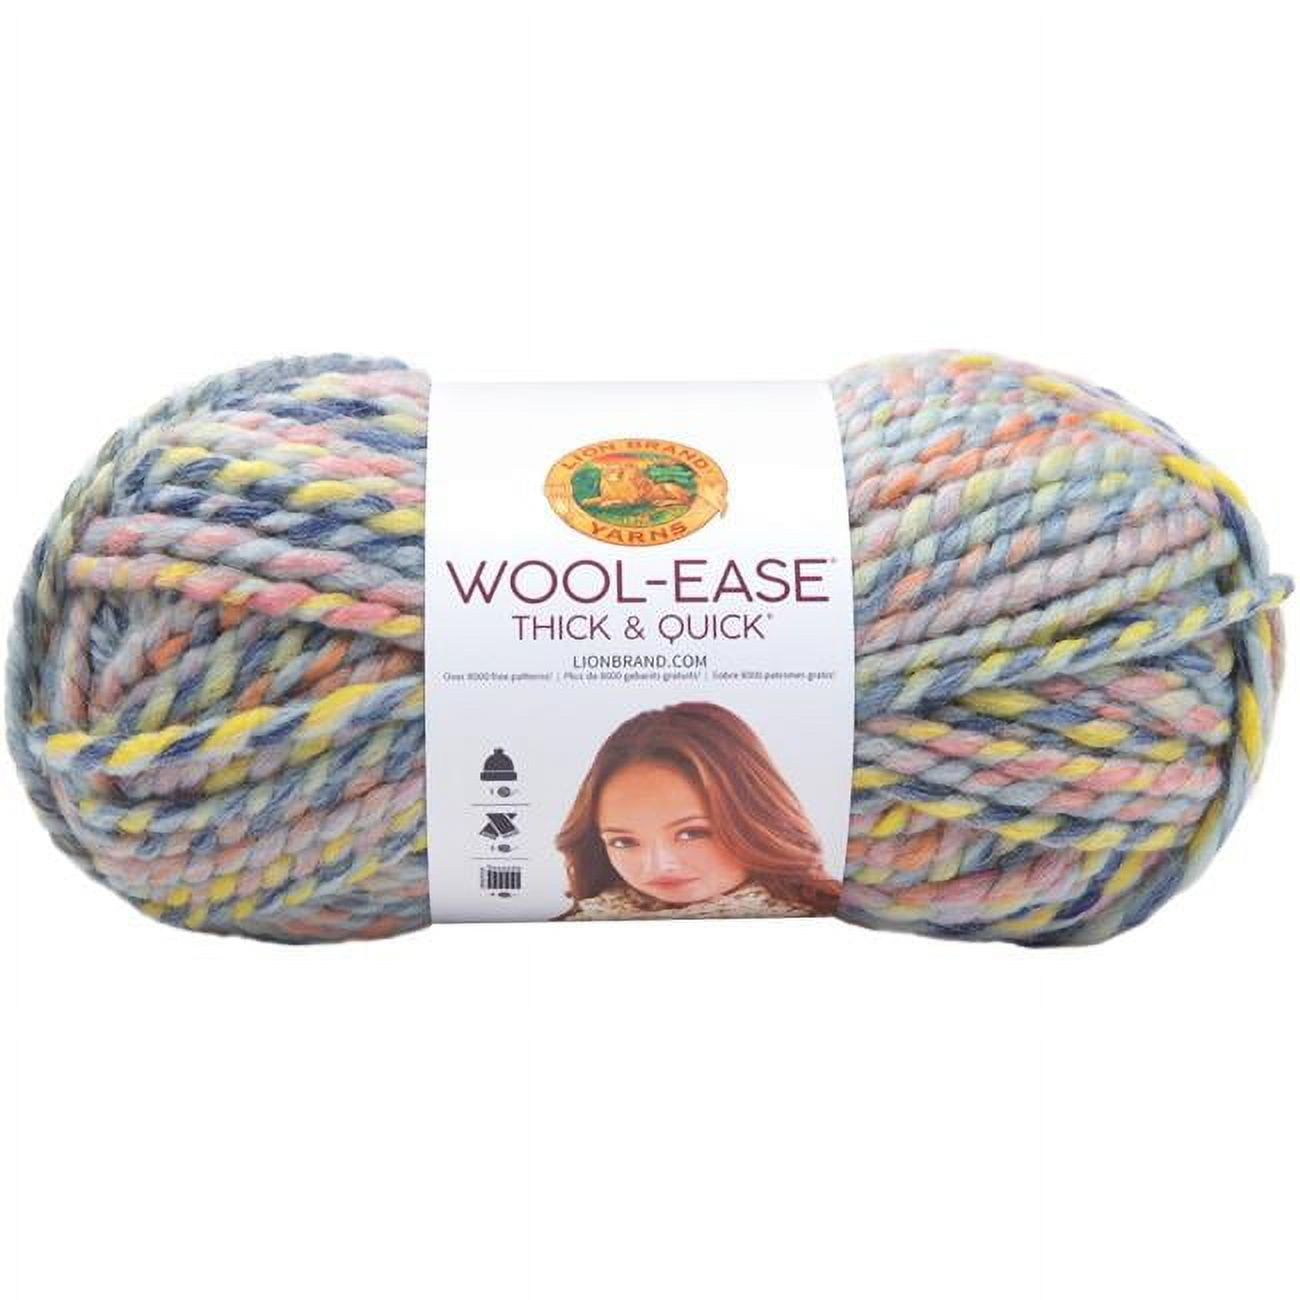 Lion Brand 640-539 Wool-Ease Thick & Quick Yarn, Toasted